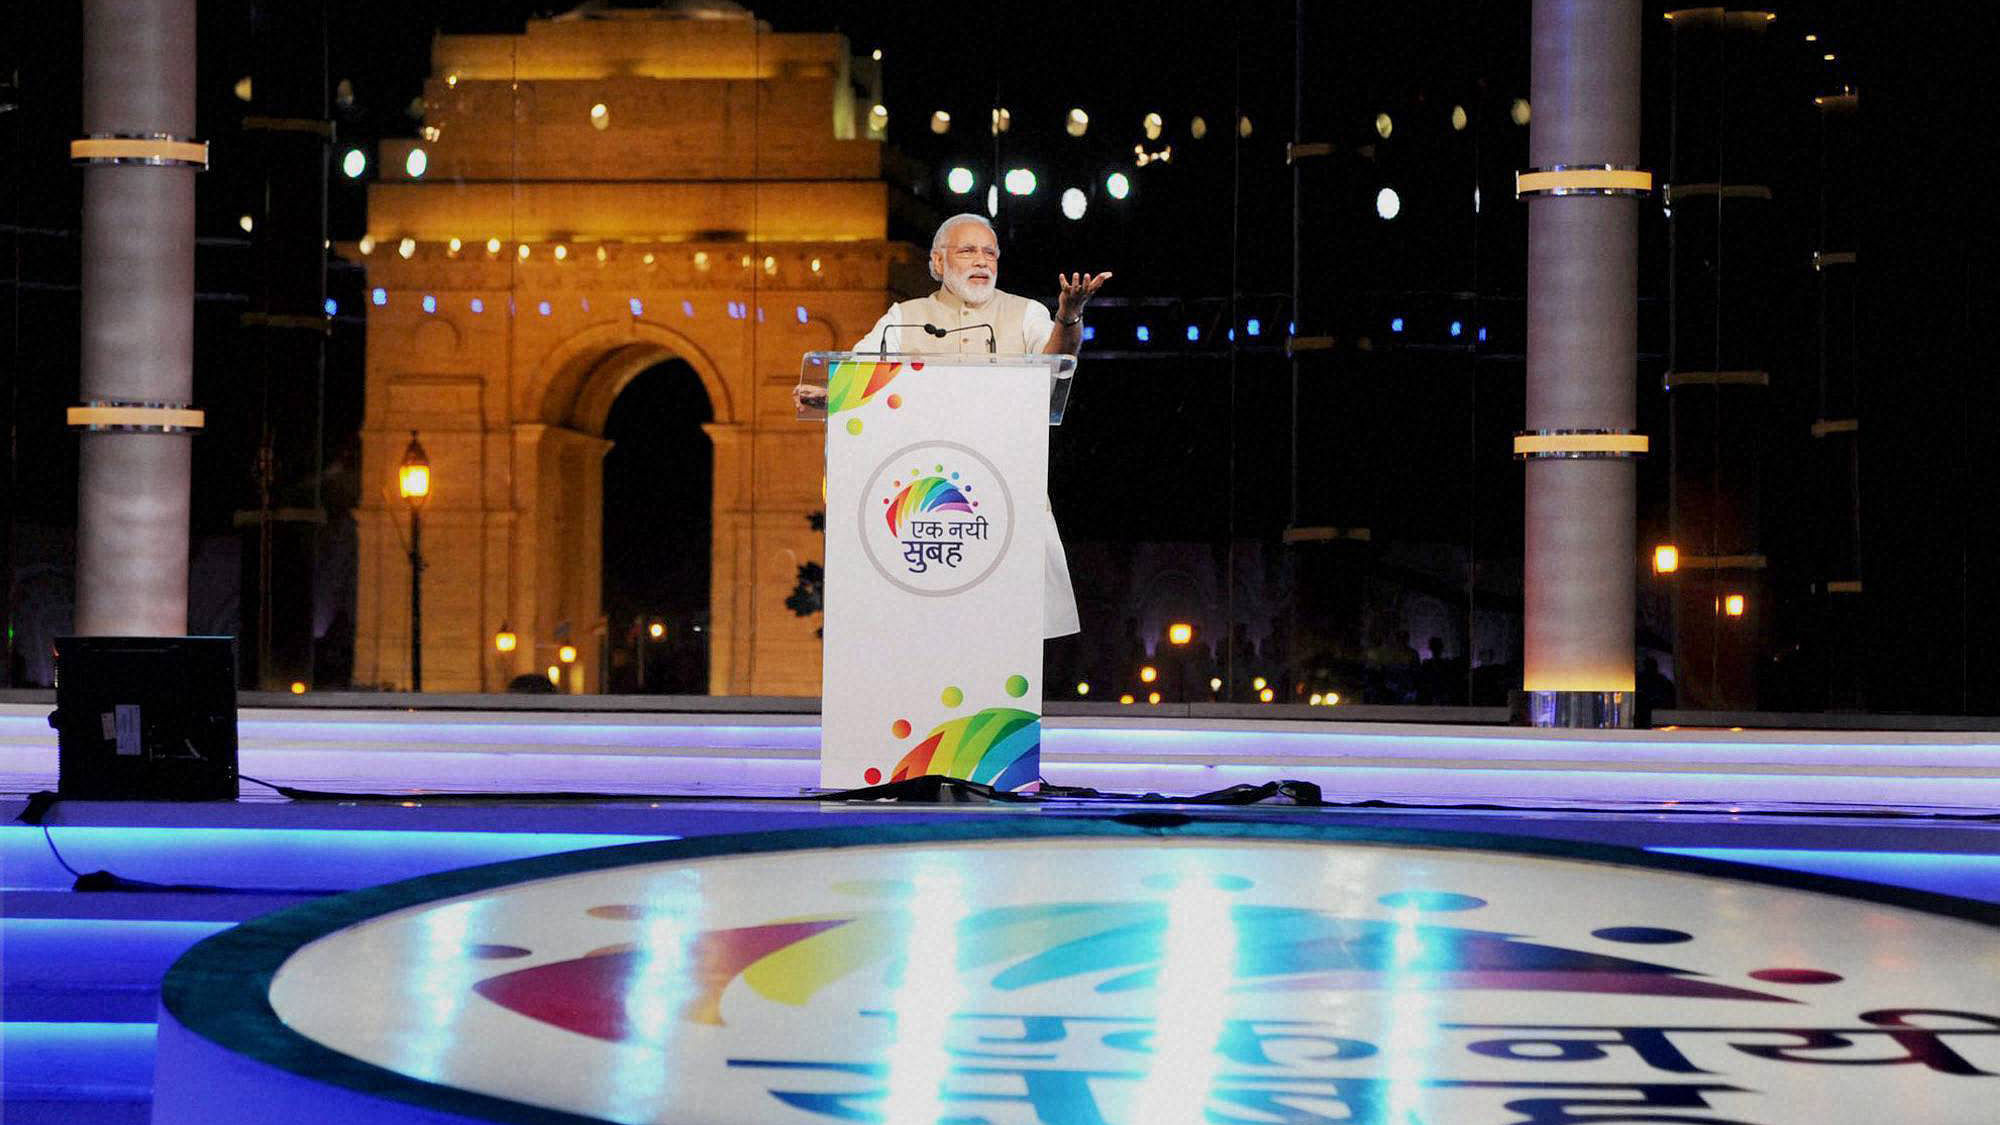 

Prime Minister Narendra Modi addressing the Ek Nayi Subah event, on the completion of two years NDA government, at India Gate in New Delhi on Saturday (Photo: PTI)